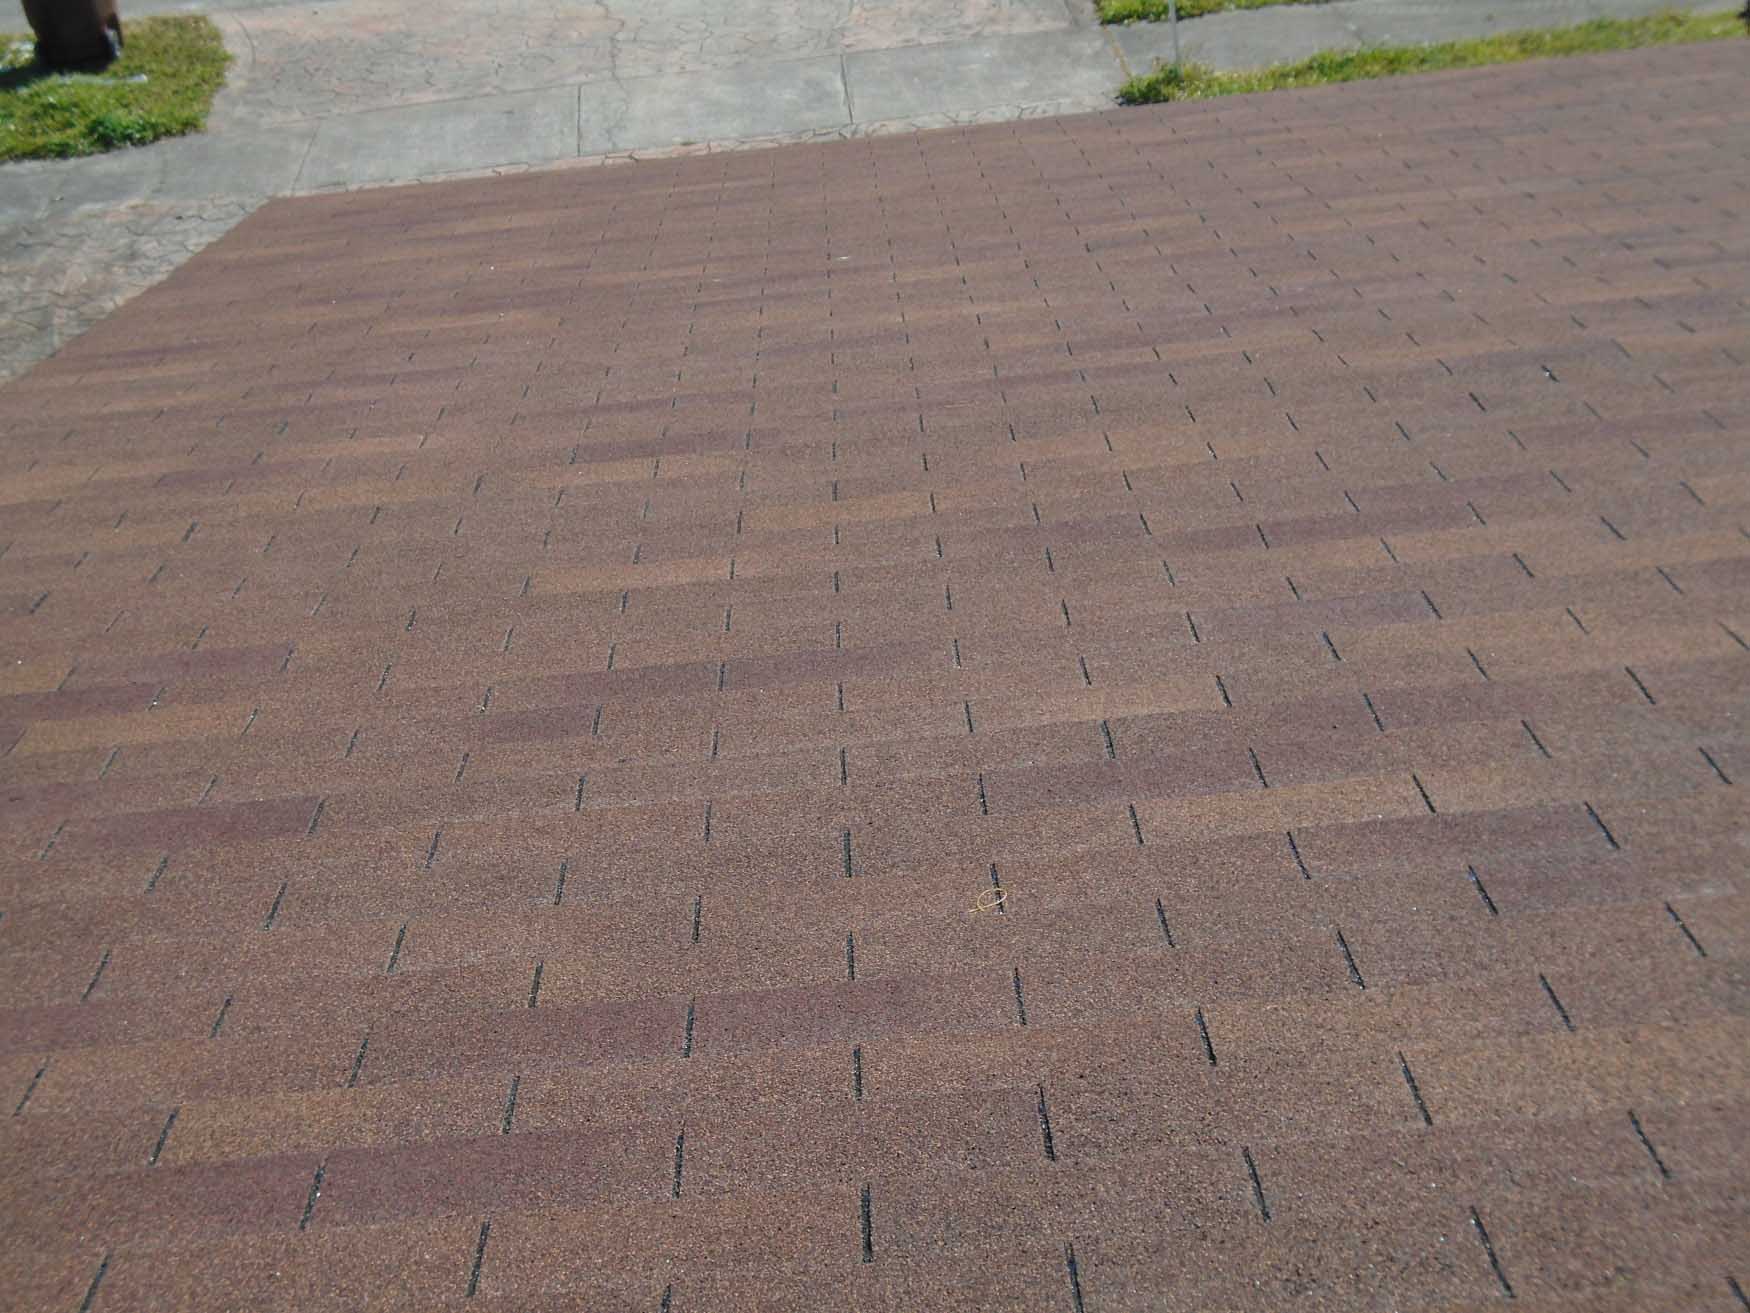 Installed 3-tab shingle on pitched roof